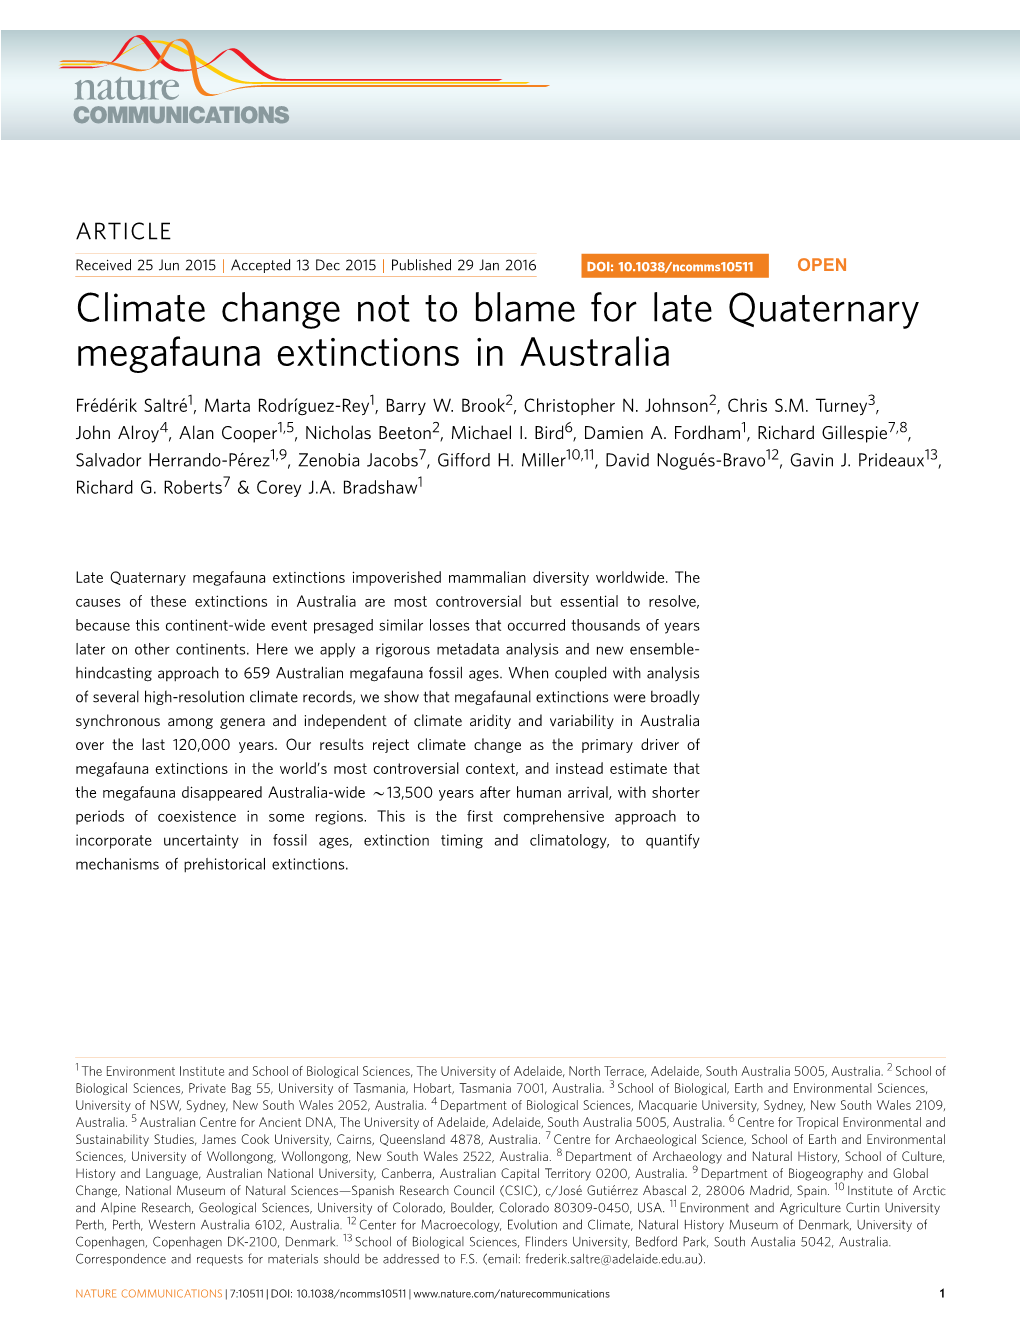 Climate Change Not to Blame for Late Quaternary Megafauna Extinctions in Australia